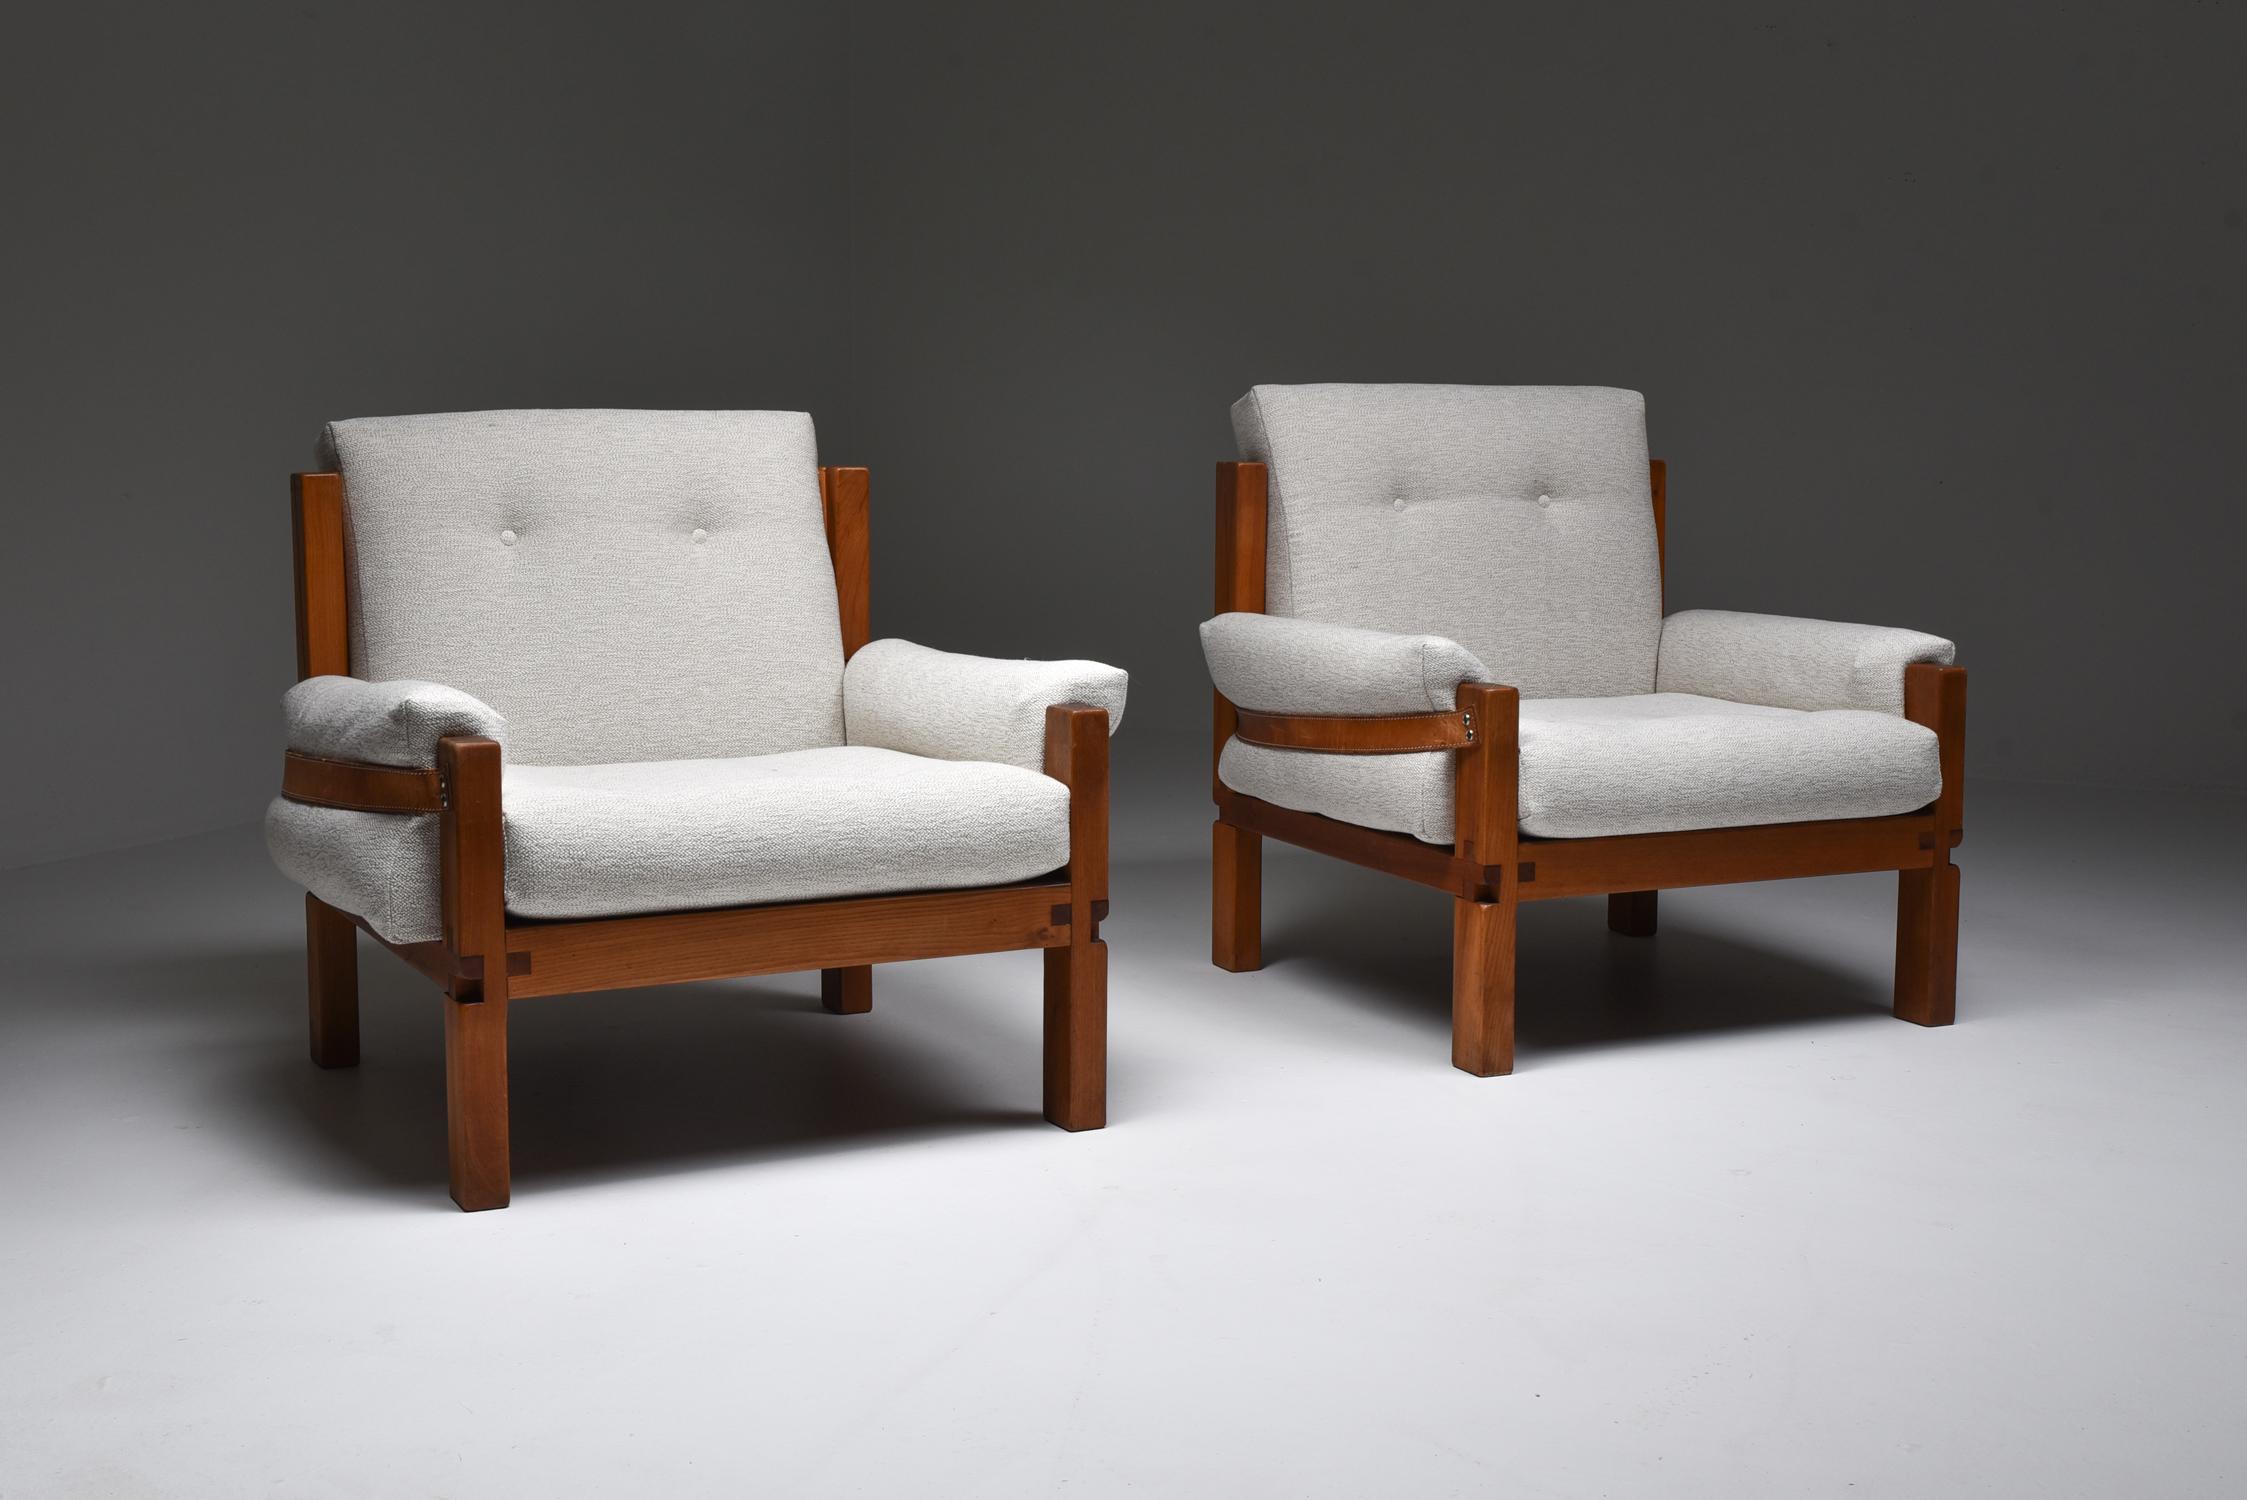 Pierre Chapo, armchairs, S15, Cognac leather, Elm, bouclé, France, ca. 1964

This set of two lounge chairs is designed by Pierre Chapo. These comfortable armchairs in solid elmwood cognac saddle leather adn bouclé are based on Chapo's 48 x 72